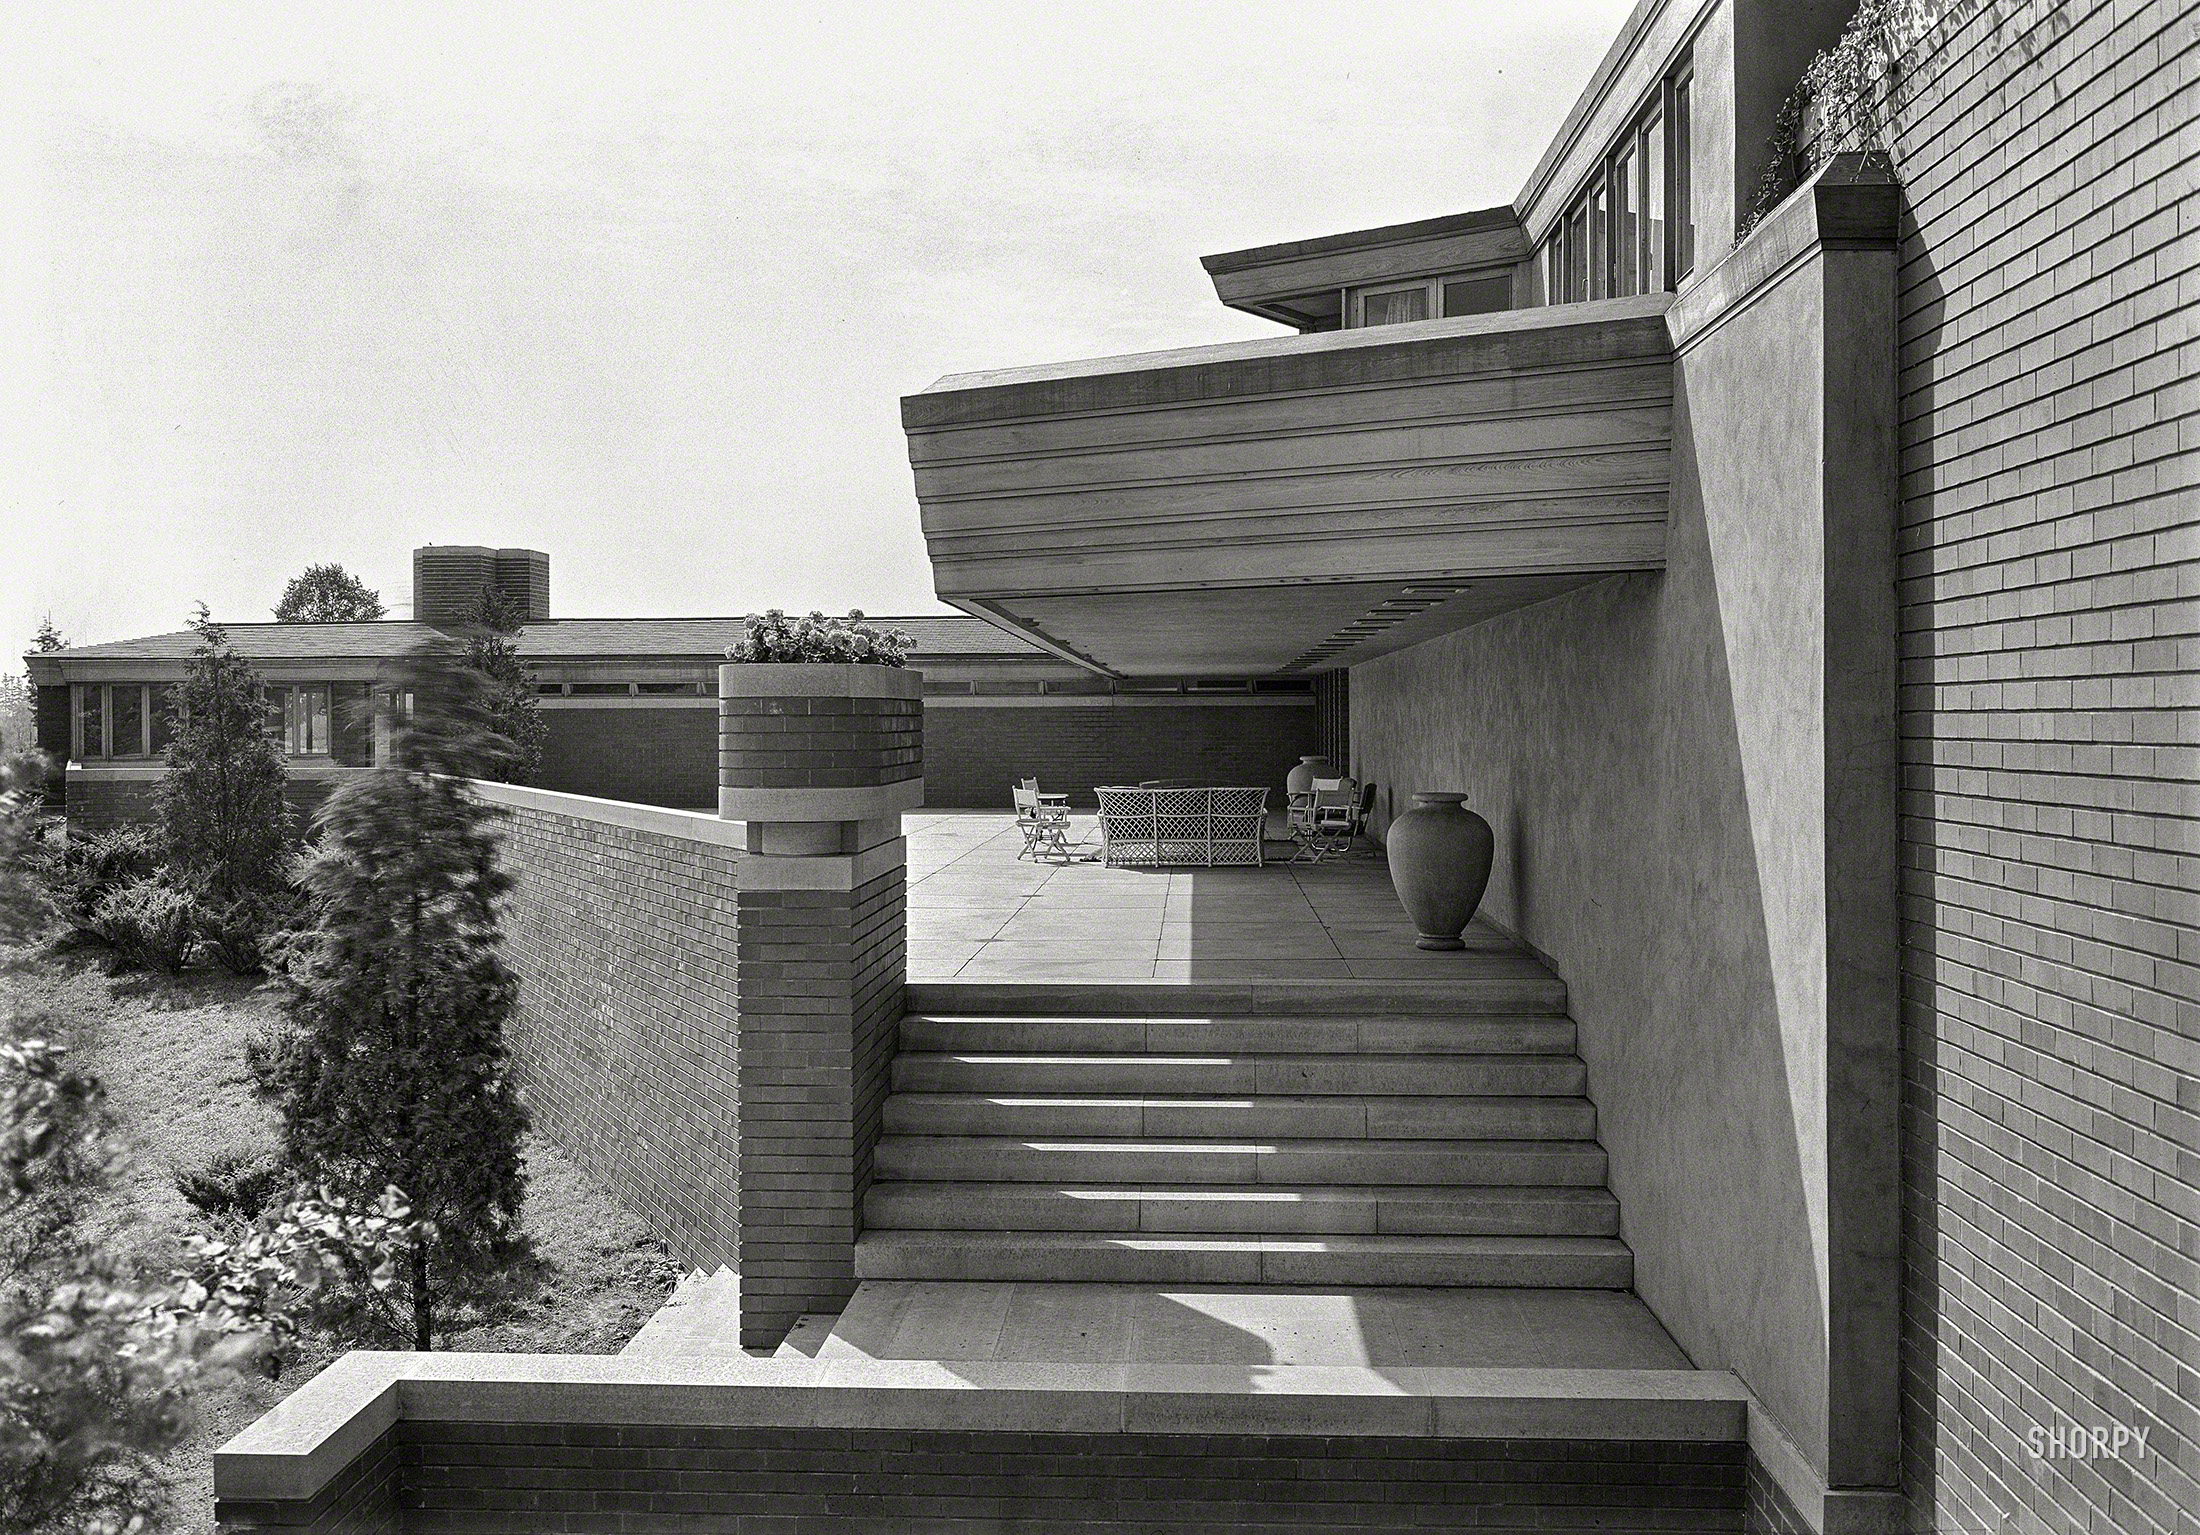 October 2, 1939. "Wingspread, Herbert F. Johnson Jr. residence in Racine, Wisconsin. Frank Lloyd Wright, architect. Angle view of terrace." The centerfold in this month's Progressive Patio. Gottscho-Schleisner photo. View full size.